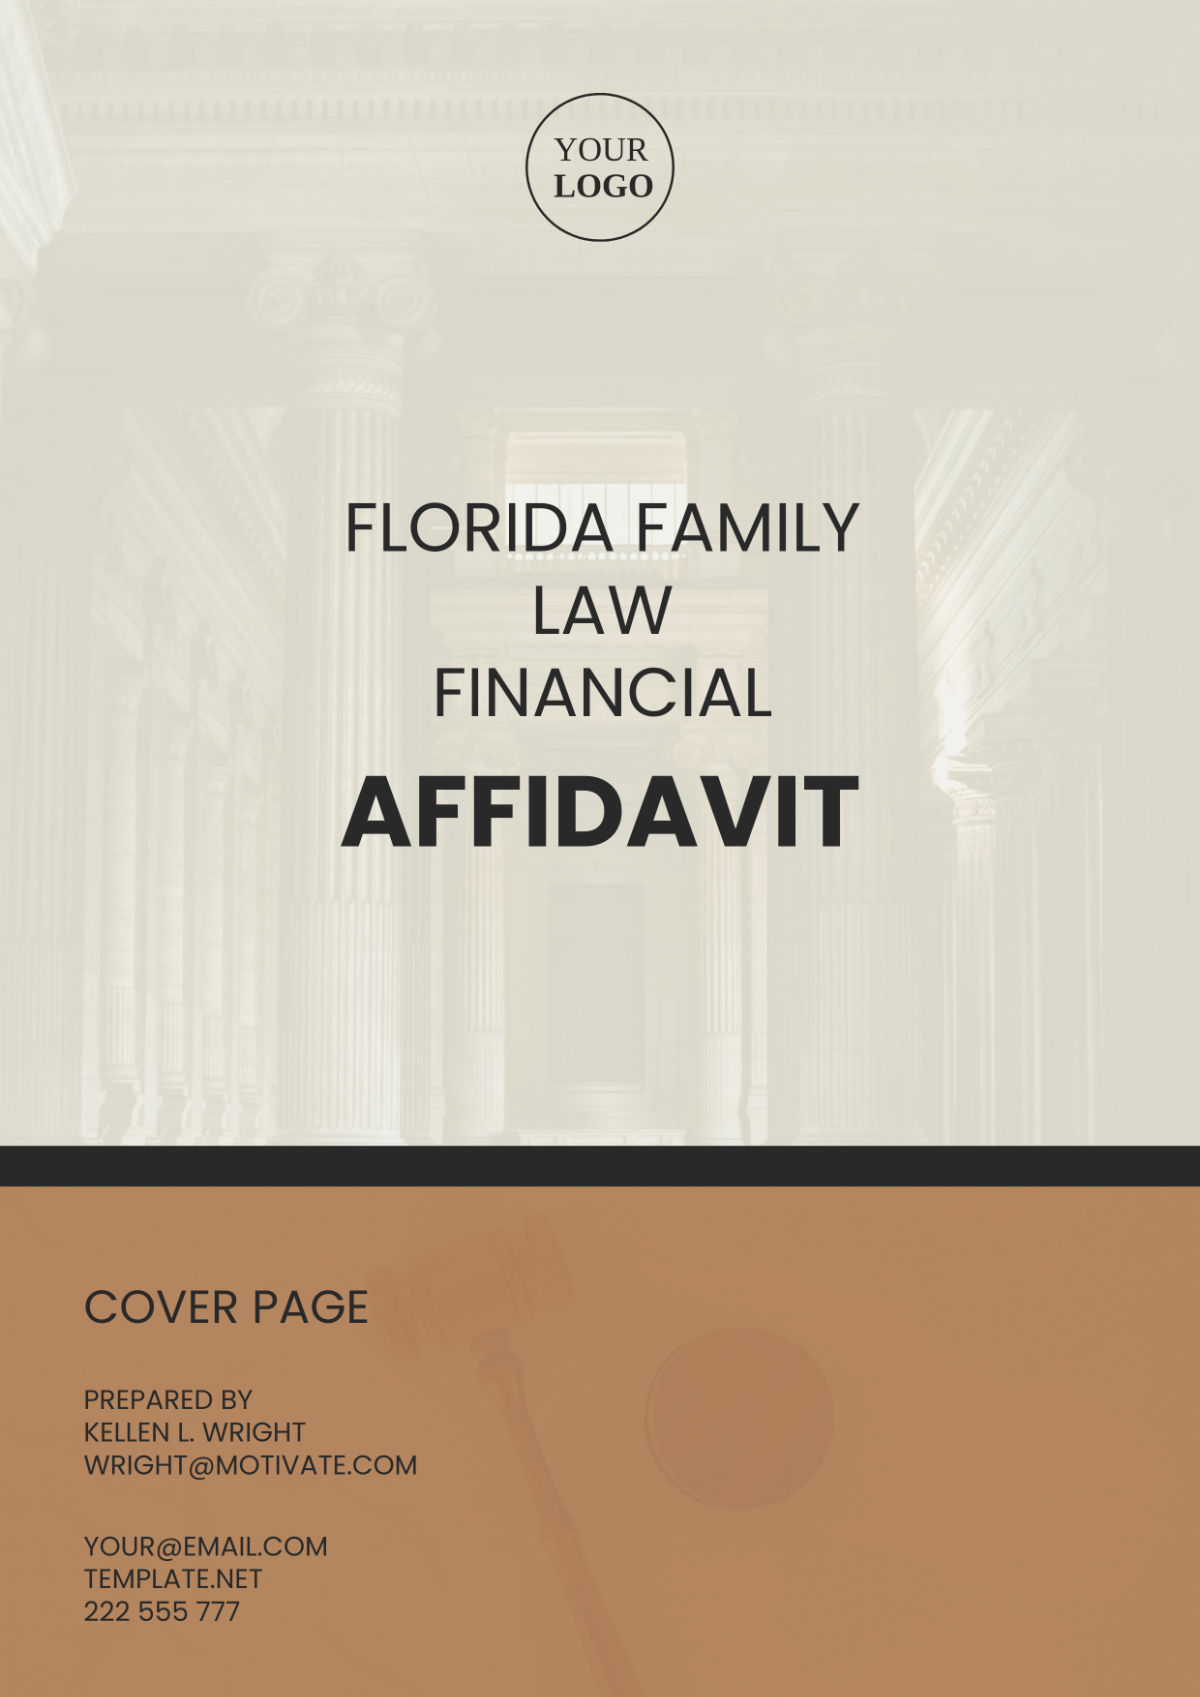 Florida Family Law Financial Affidavit Cover Page Template